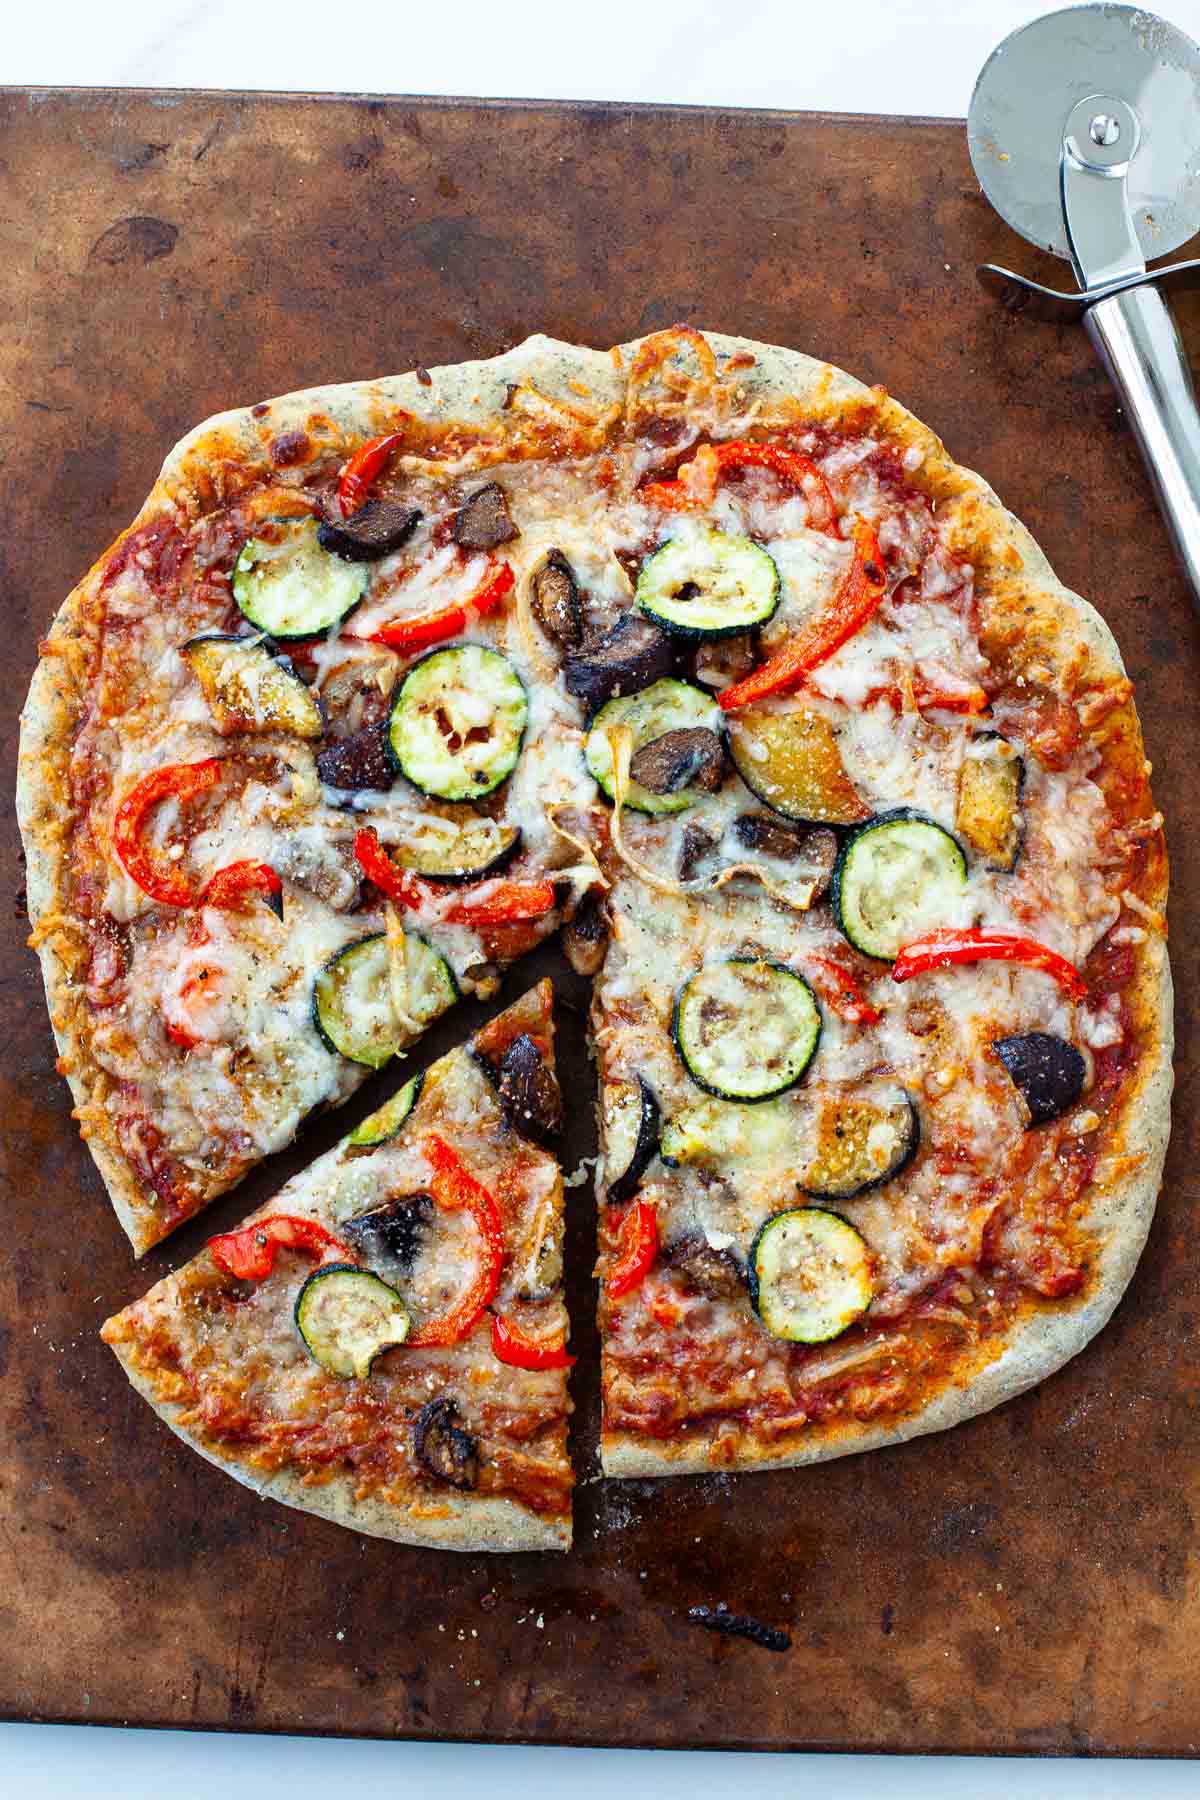 roasted vegetable pizza on pizza stone with pizza cutter and slice cut out